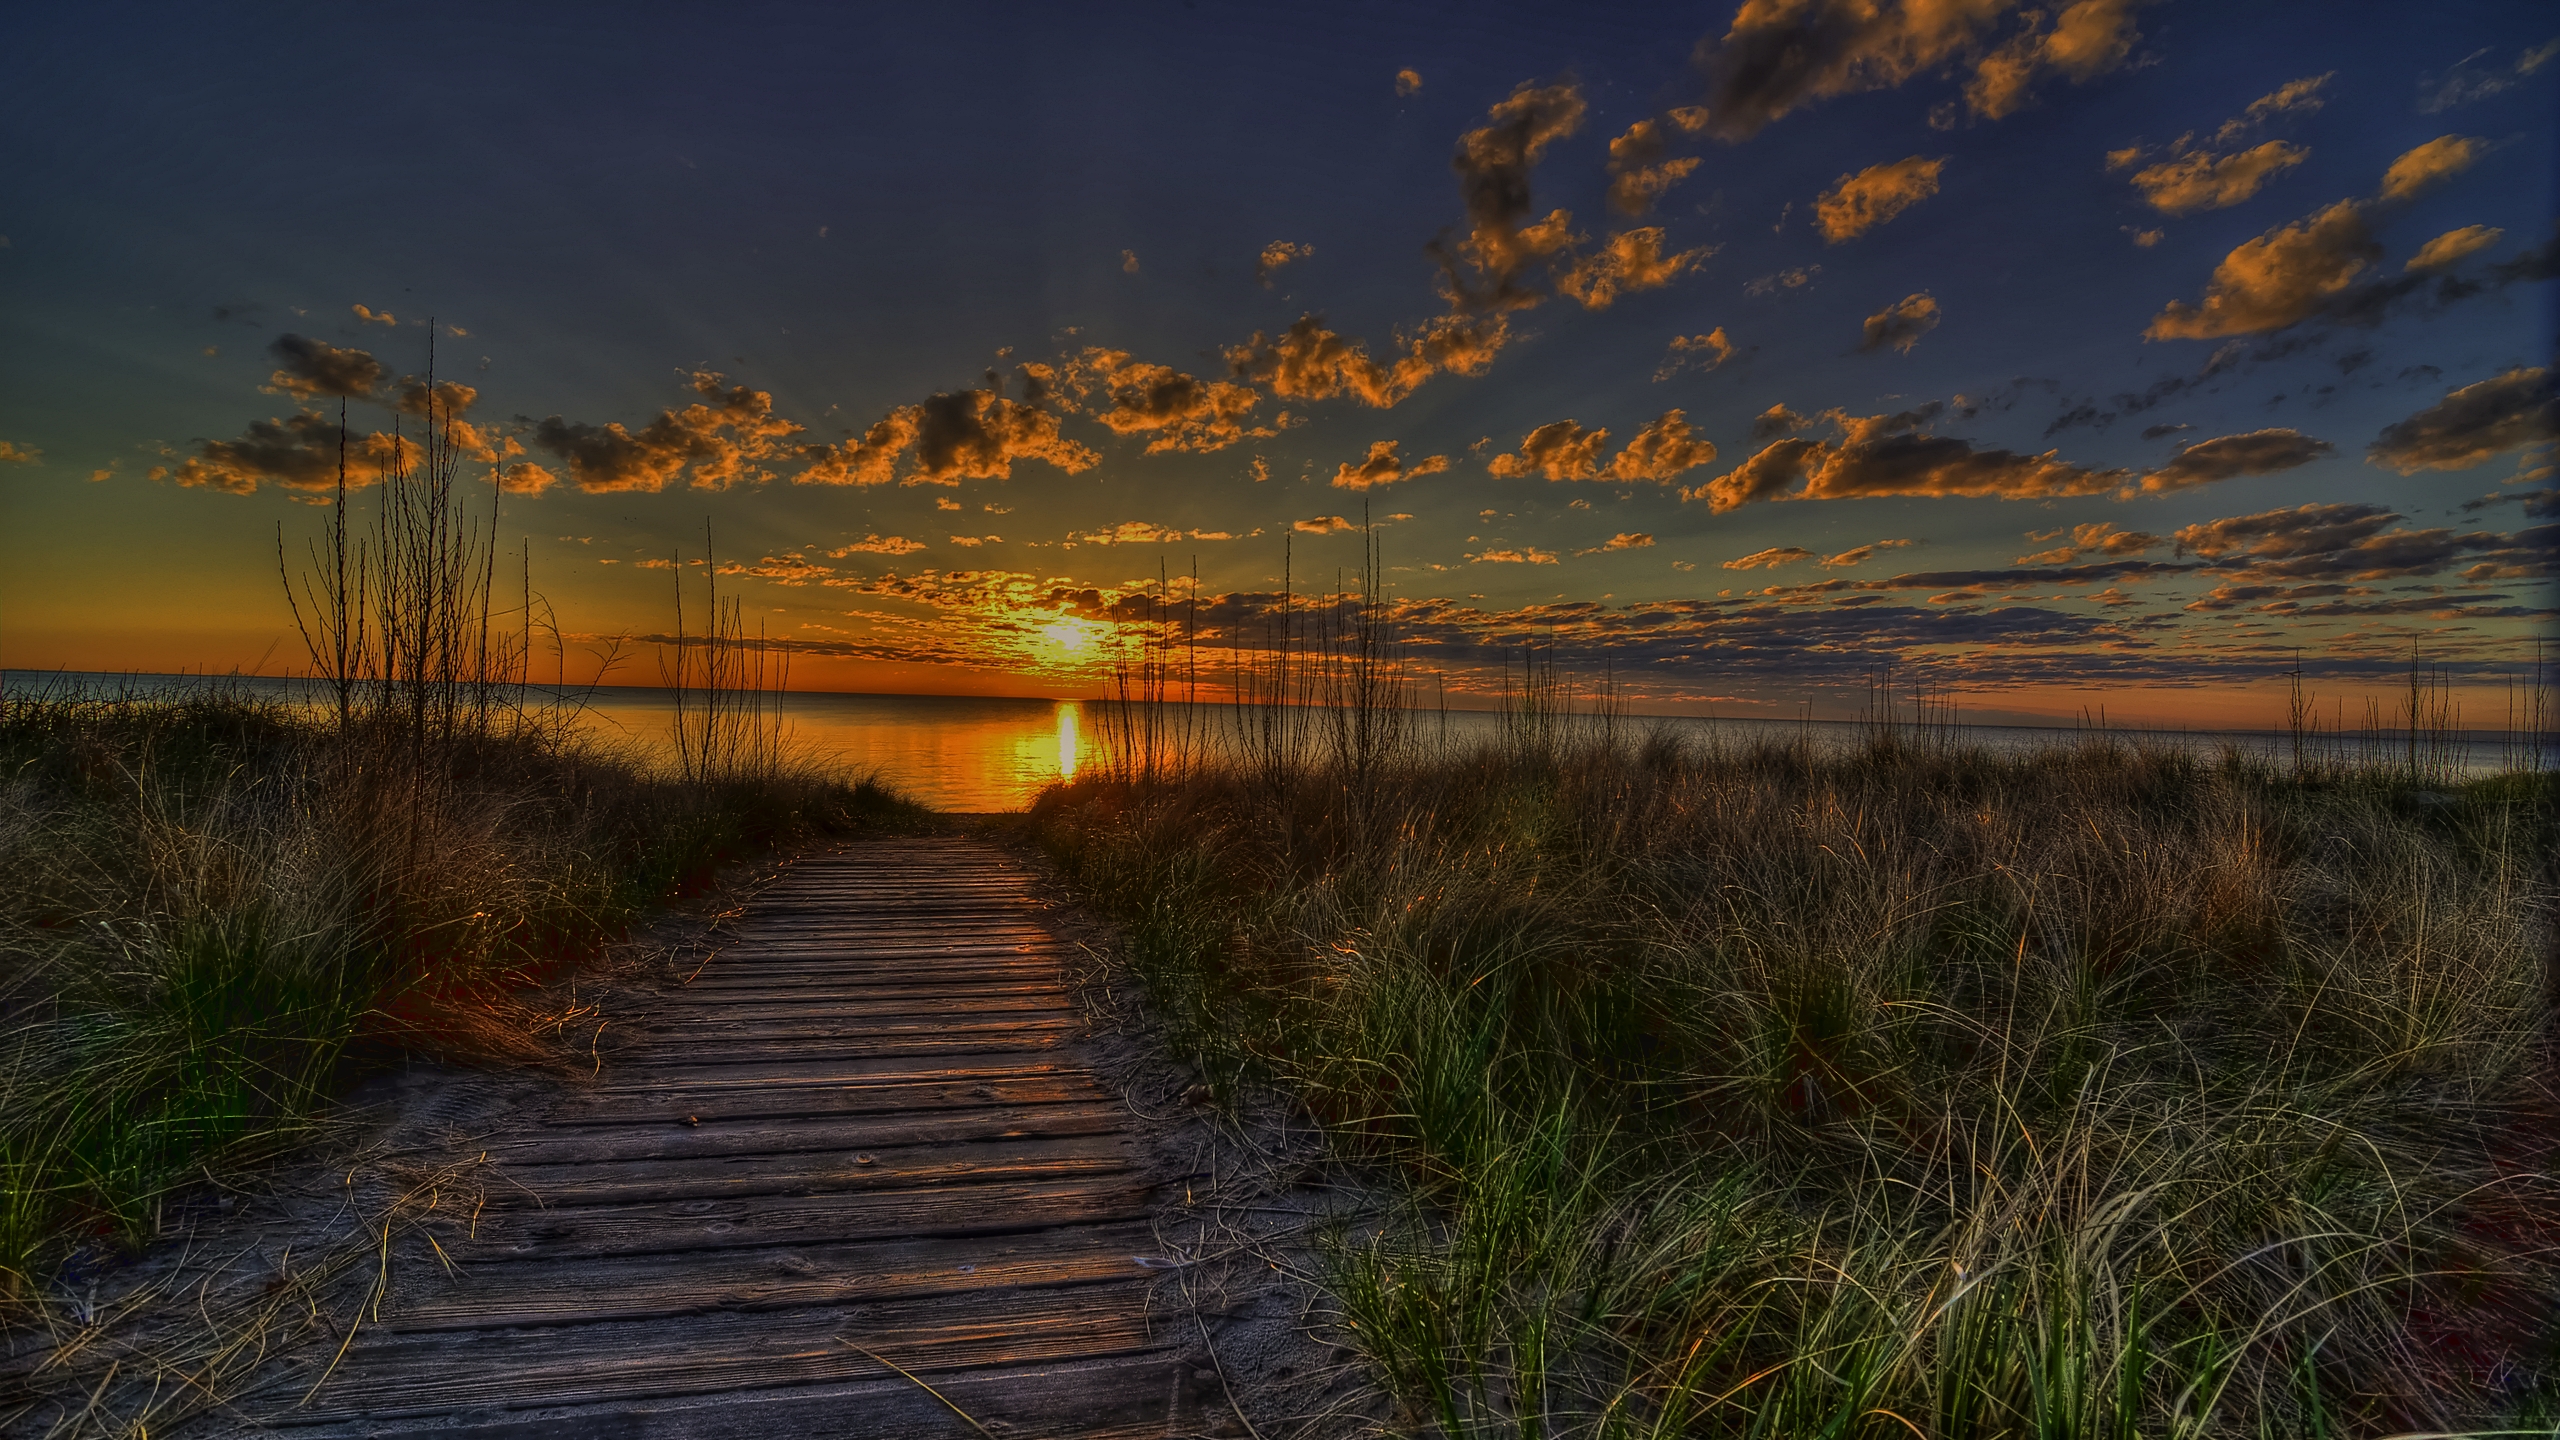 HDR HD Wallpaper | Background Image | 2560x1440 | ID ...